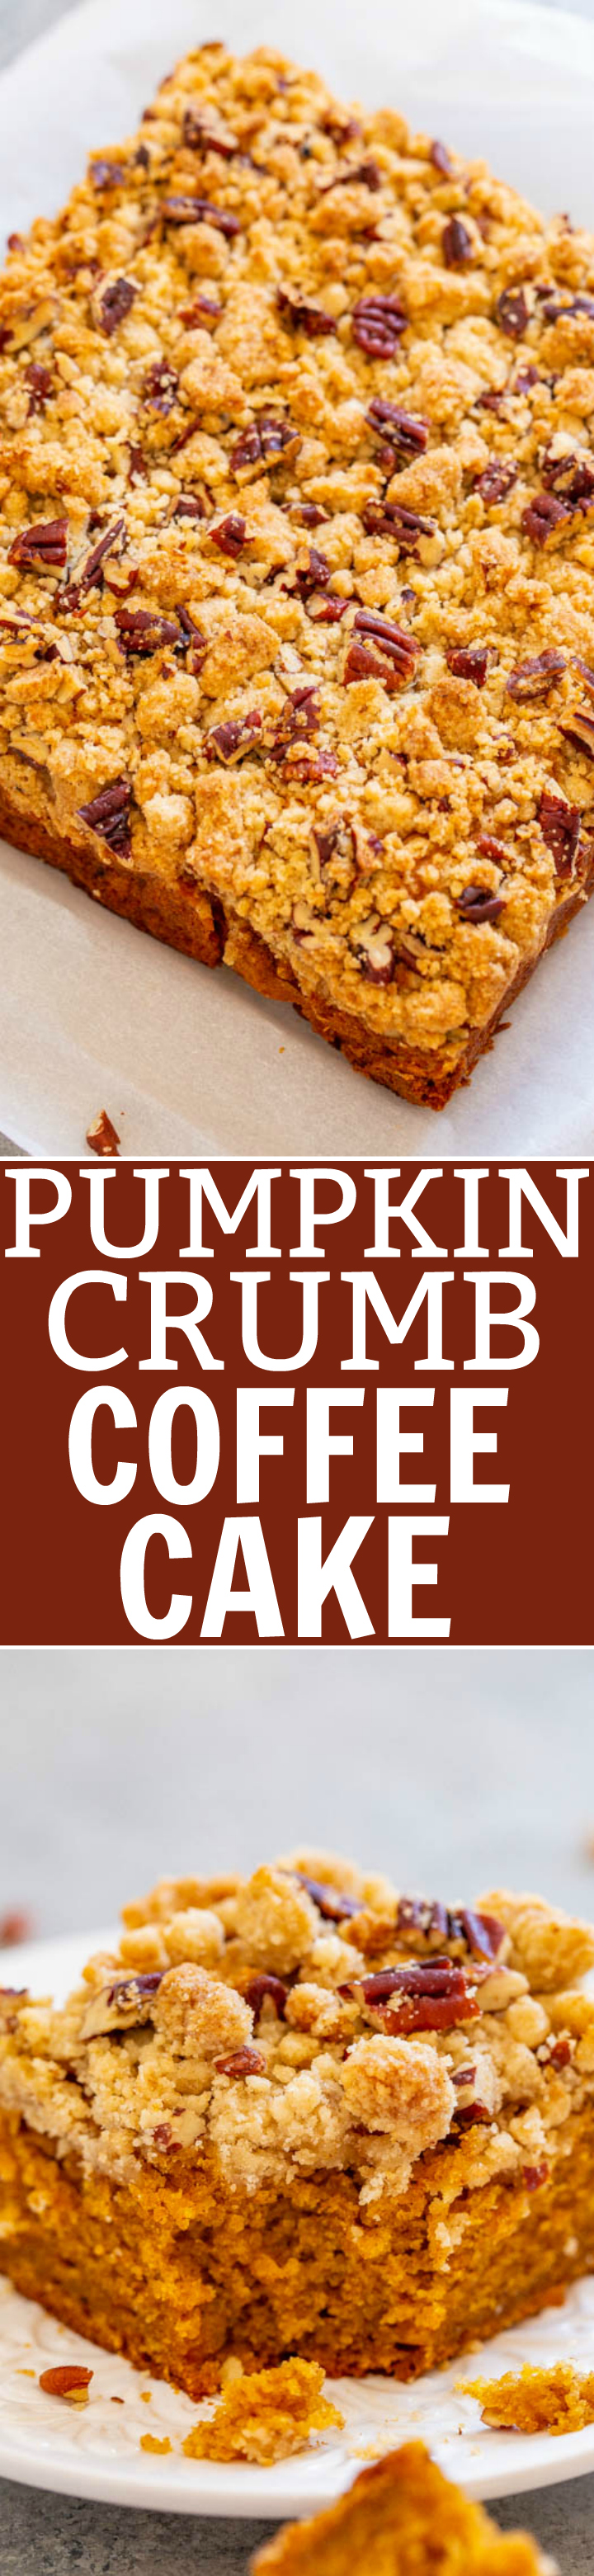 Pumpkin Crumb Coffee Cake - A FAST and EASY no-mixer coffee cake with rich pumpkin flavor!! Super soft, tender, and topped with the BEST crumble topping that you'll fall in love with! Great for brunches and holiday entertaining!!